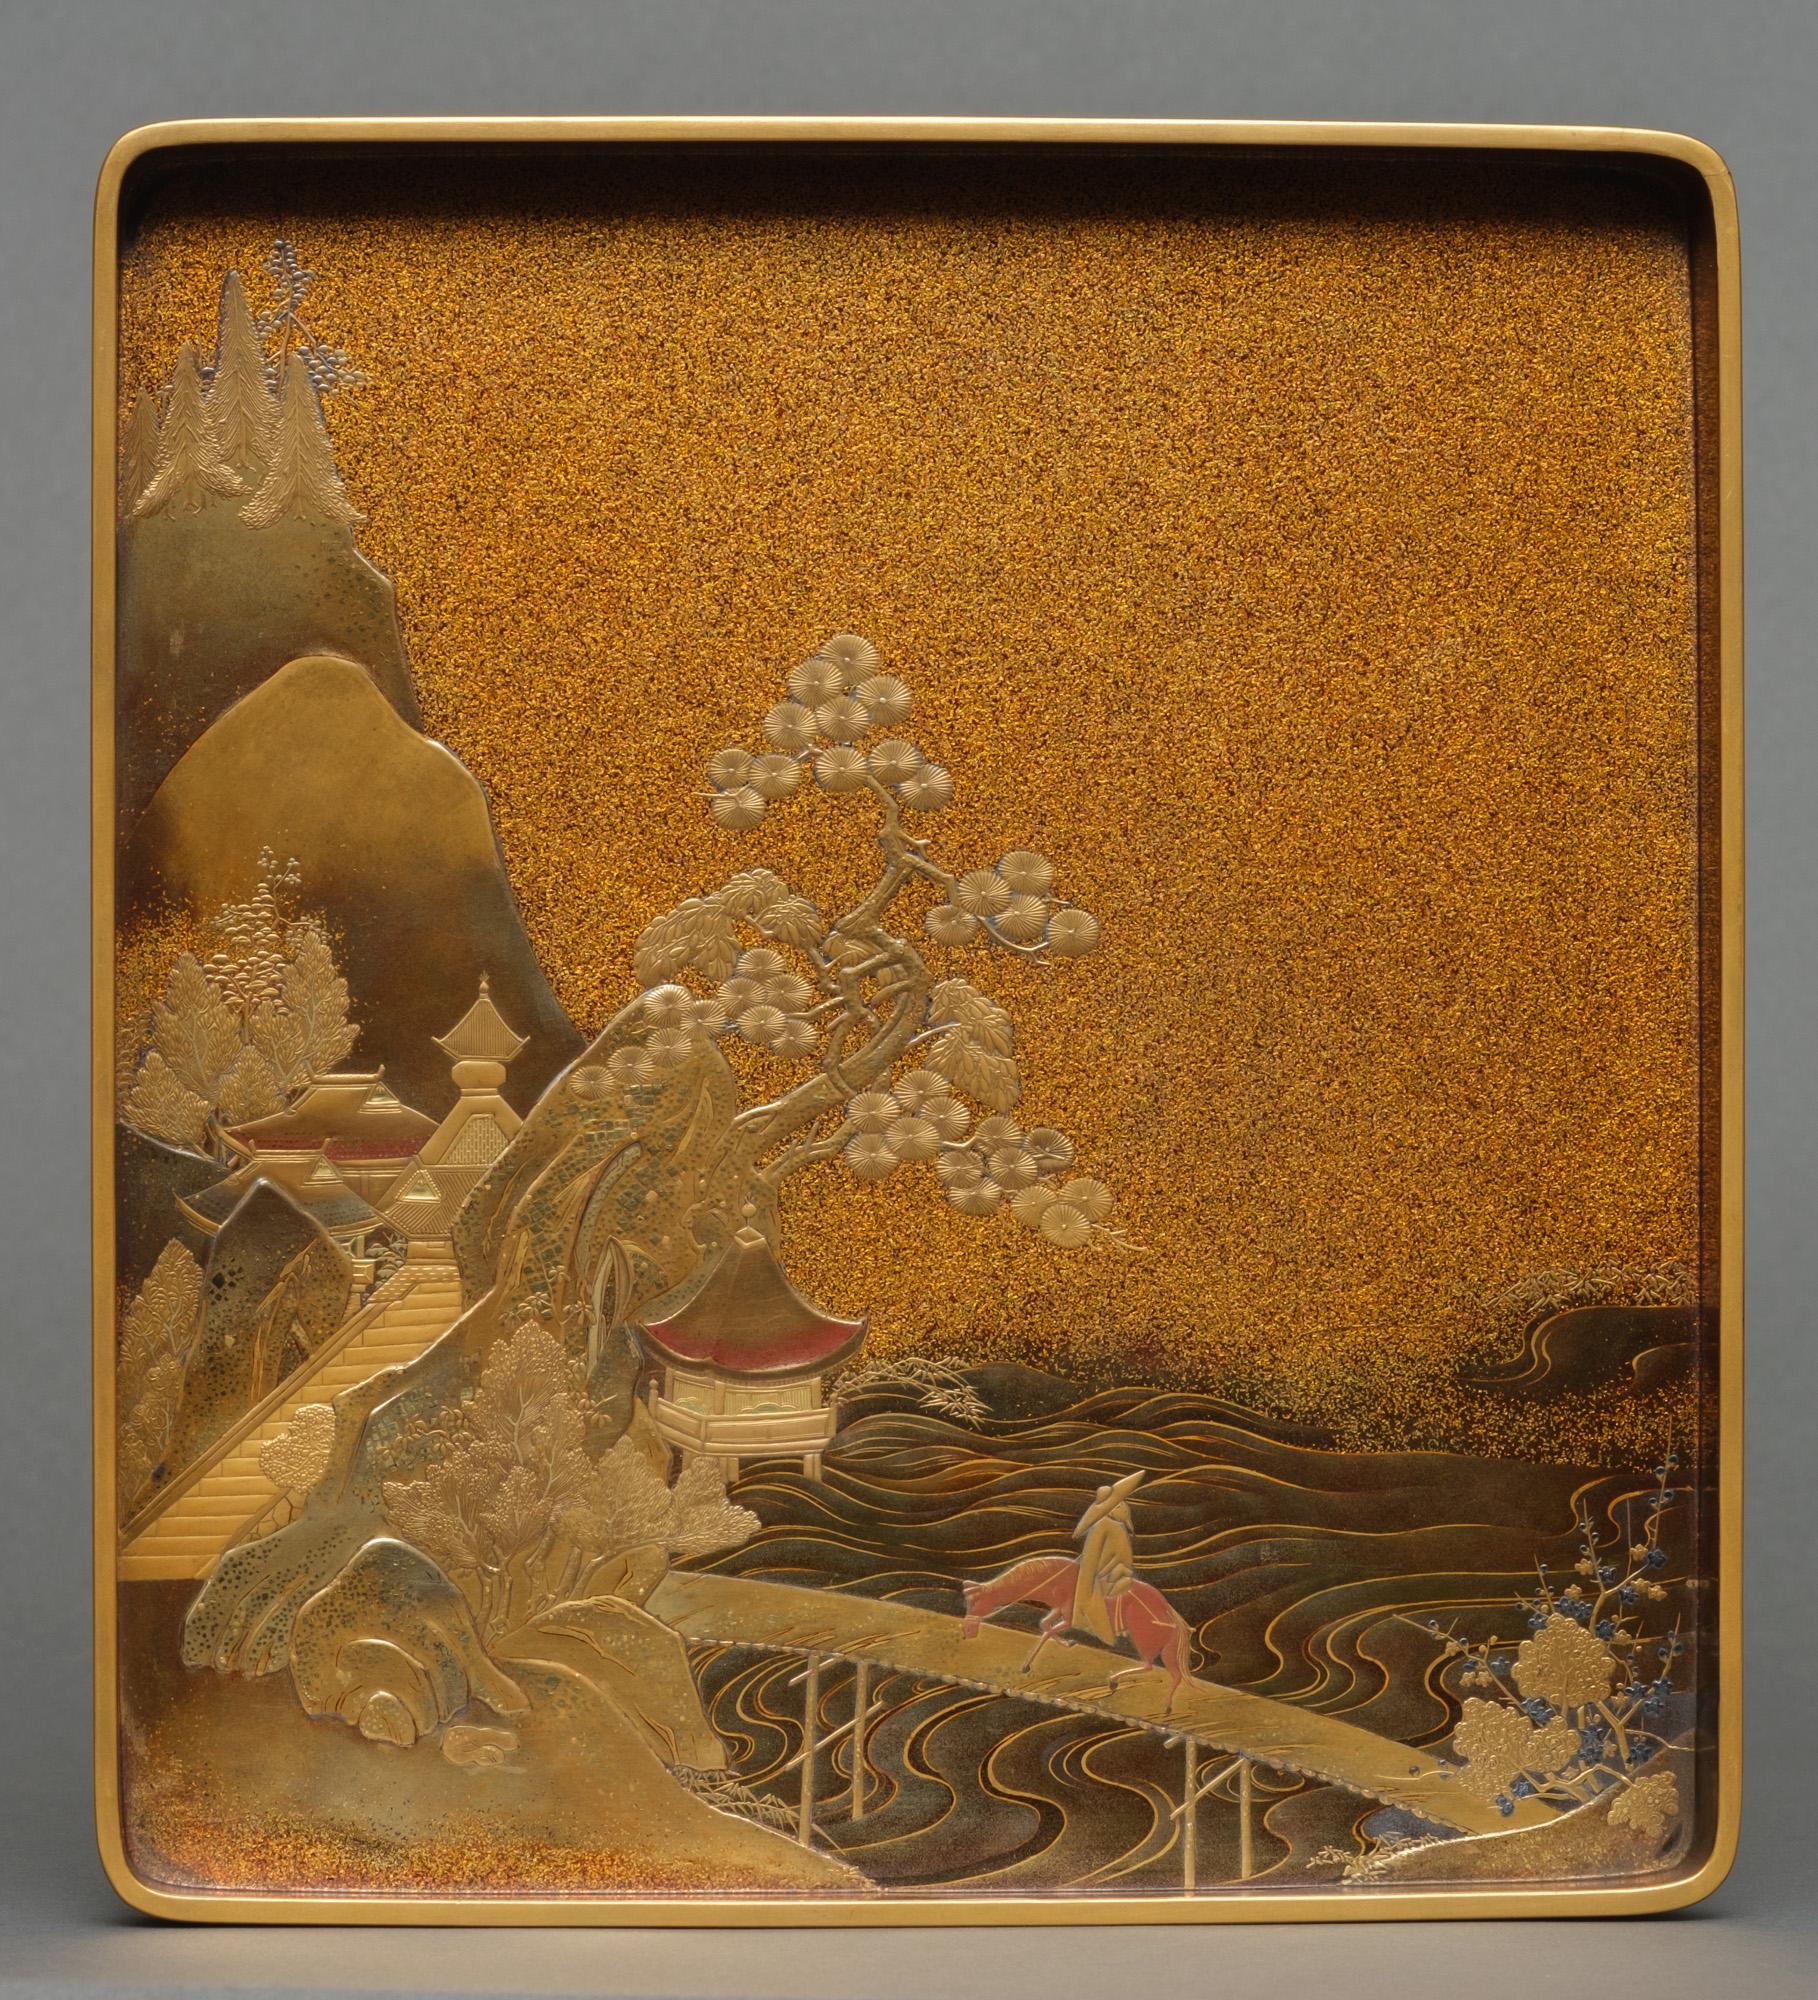 Hand-Crafted Japanese lacquer suzuri’bako 箱 with a cherry blossom & Chinese landscape design